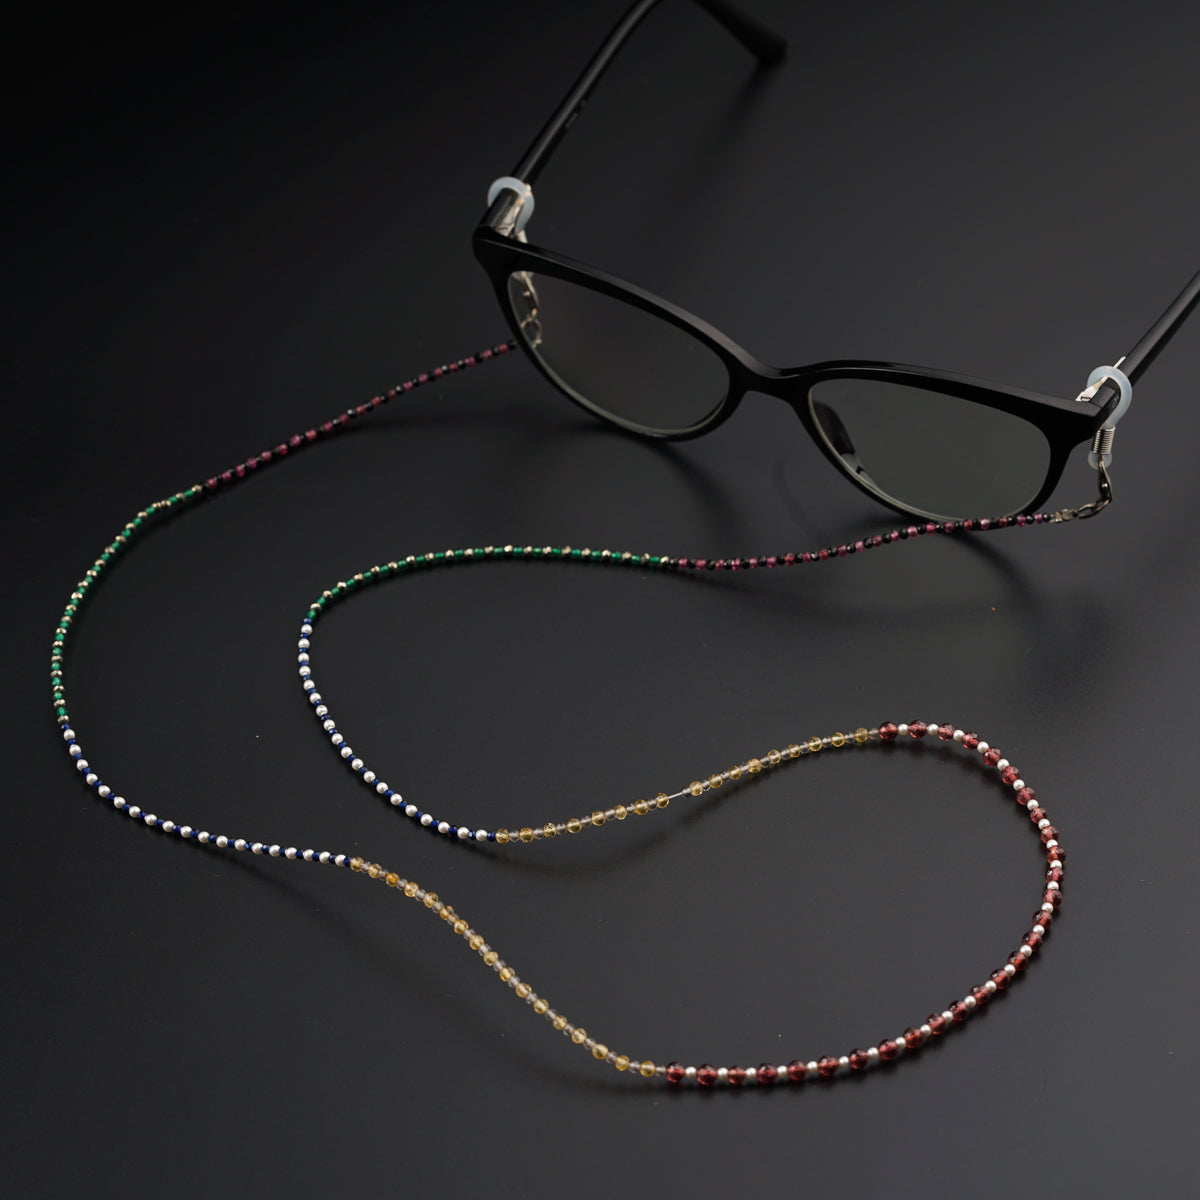 a pair of glasses with beads on a black background